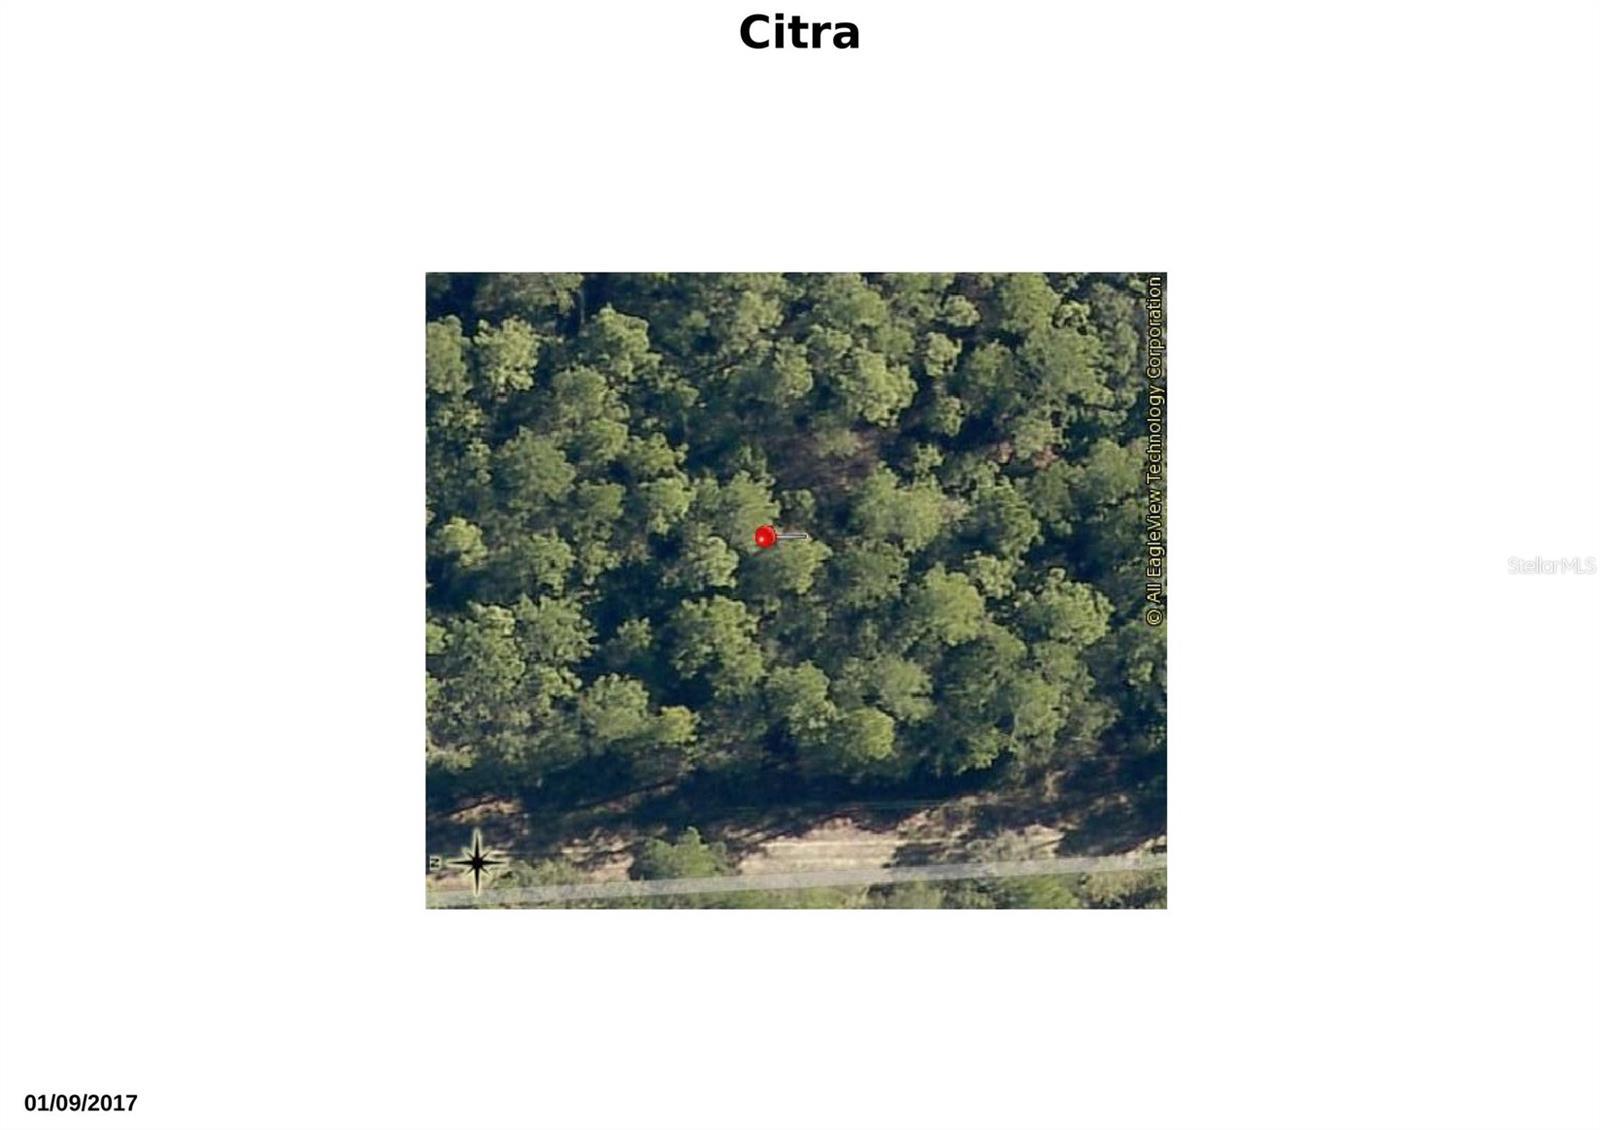 66TH, CITRA, Land,  for sale, The Mount Dora Group 